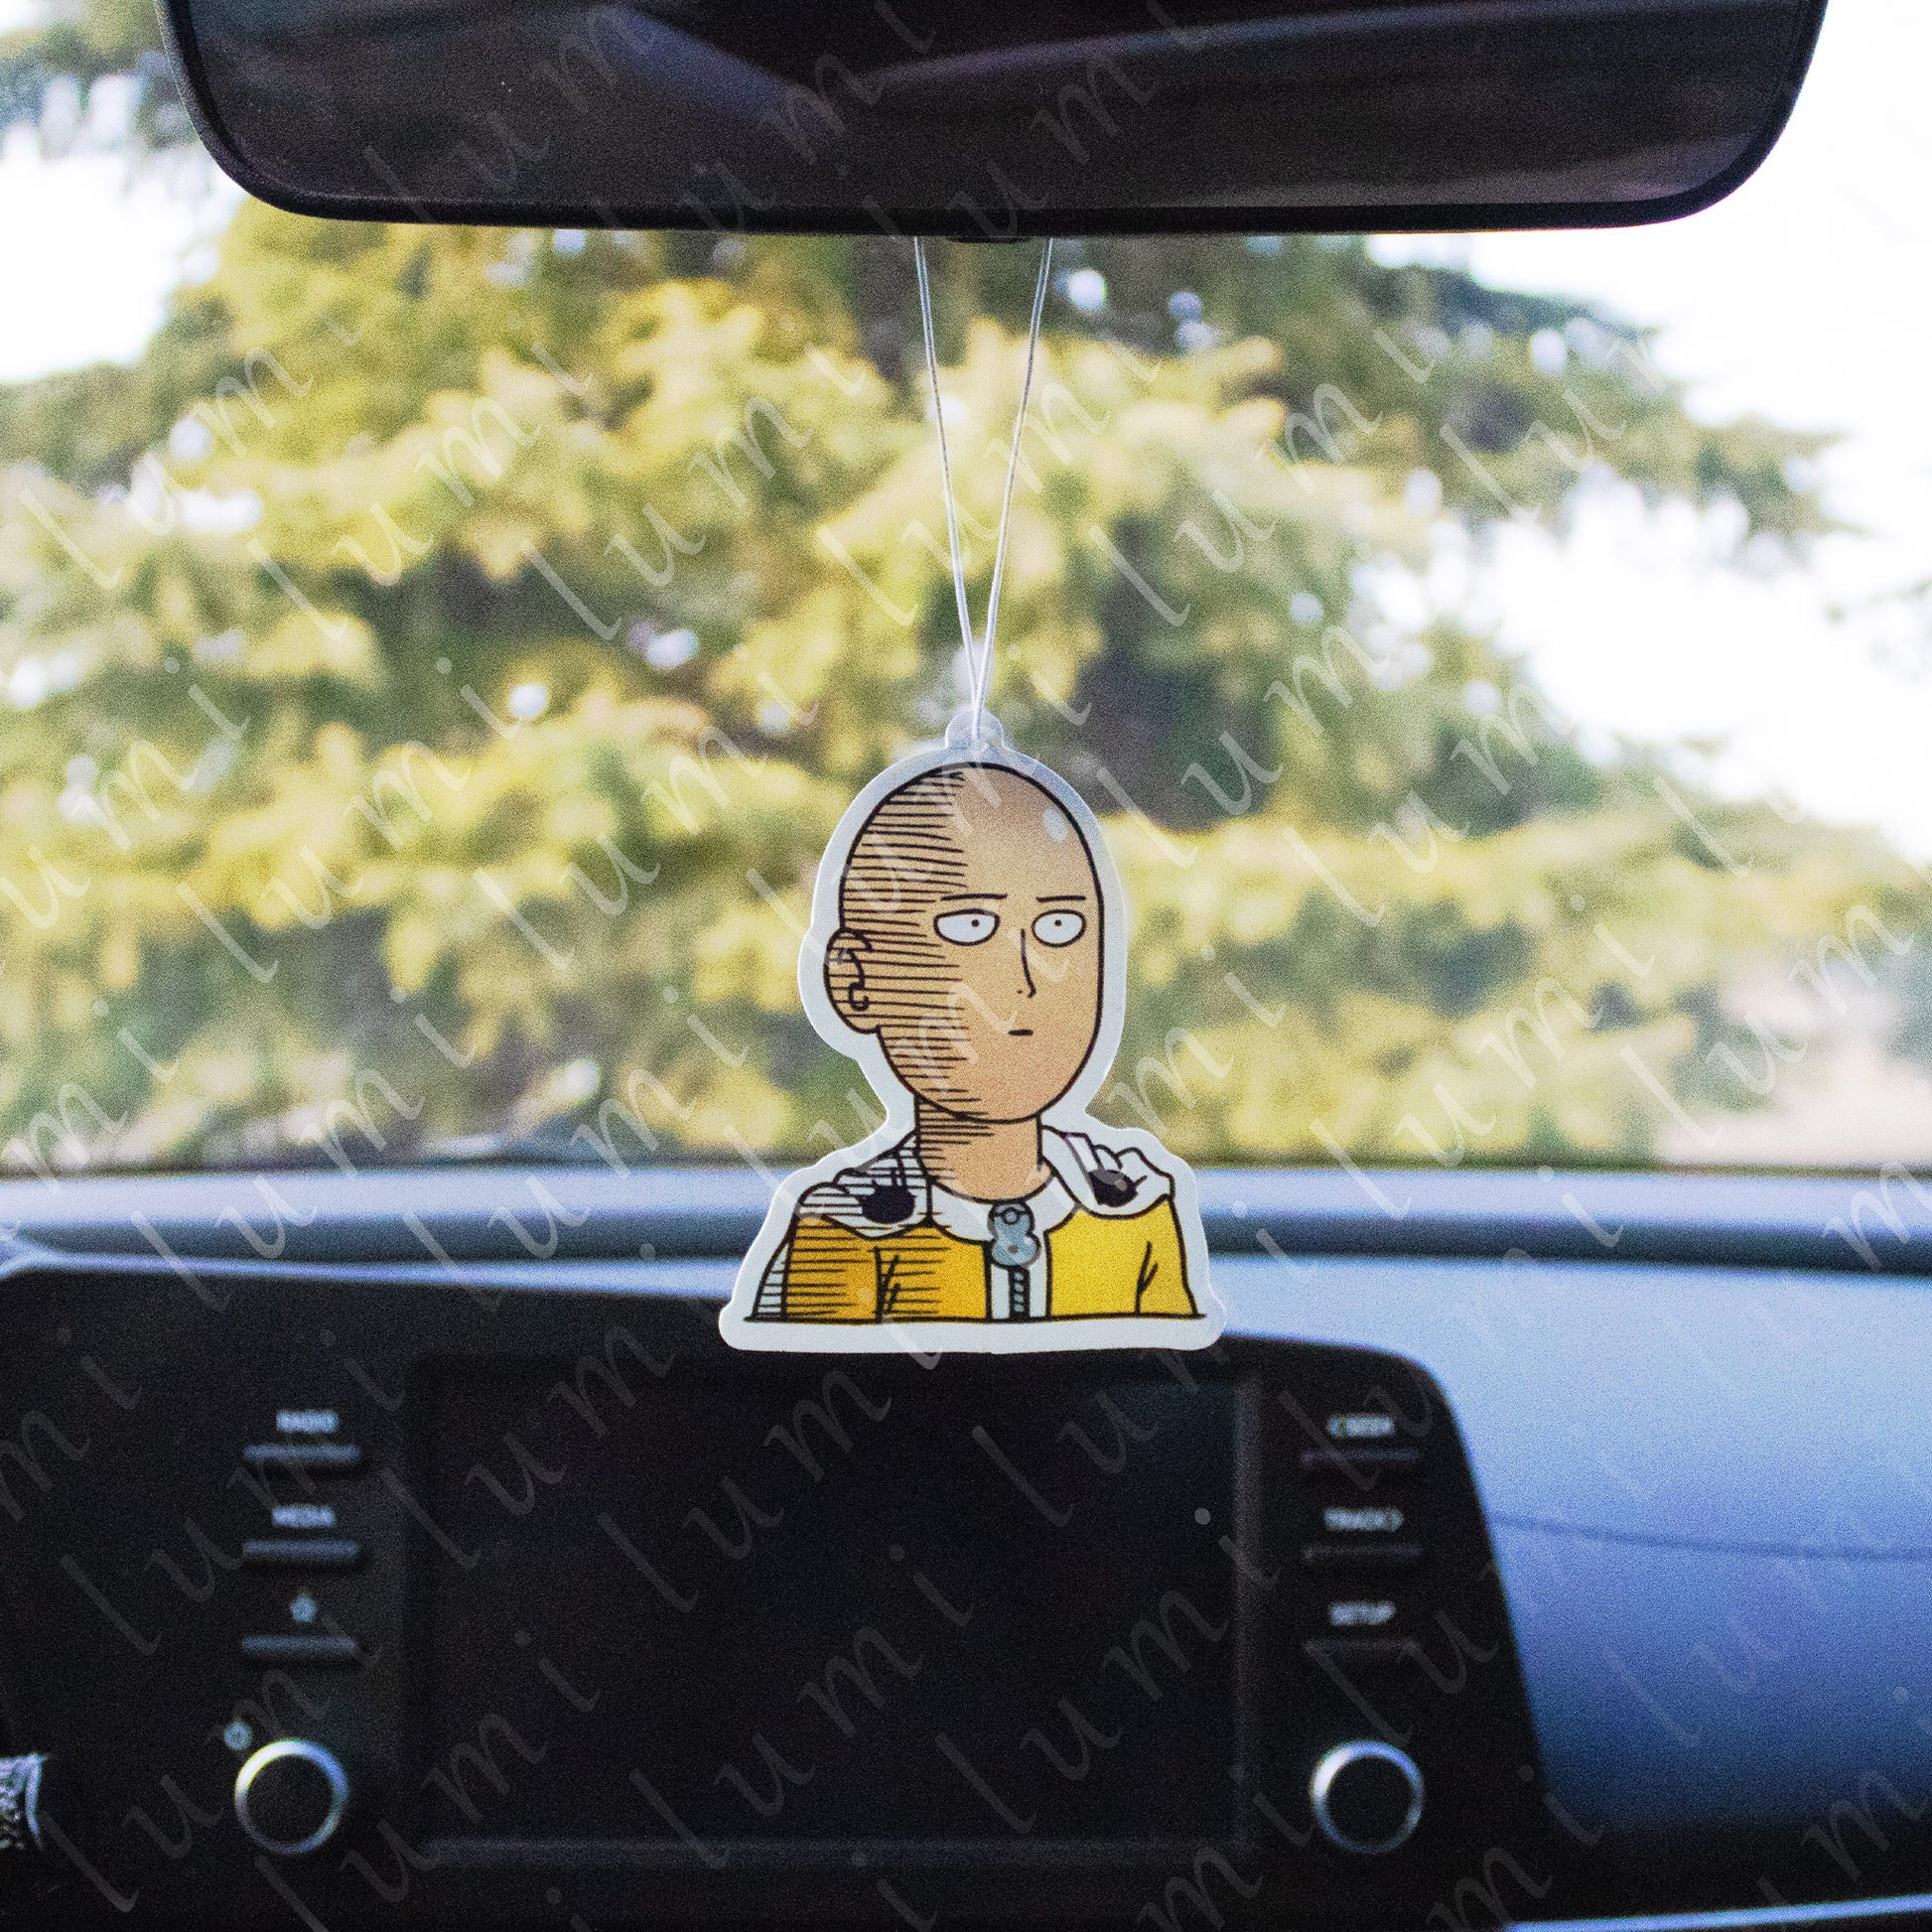 Image of Saitama from One Punch Man on an air freshener, featuring a bold and vibrant design.